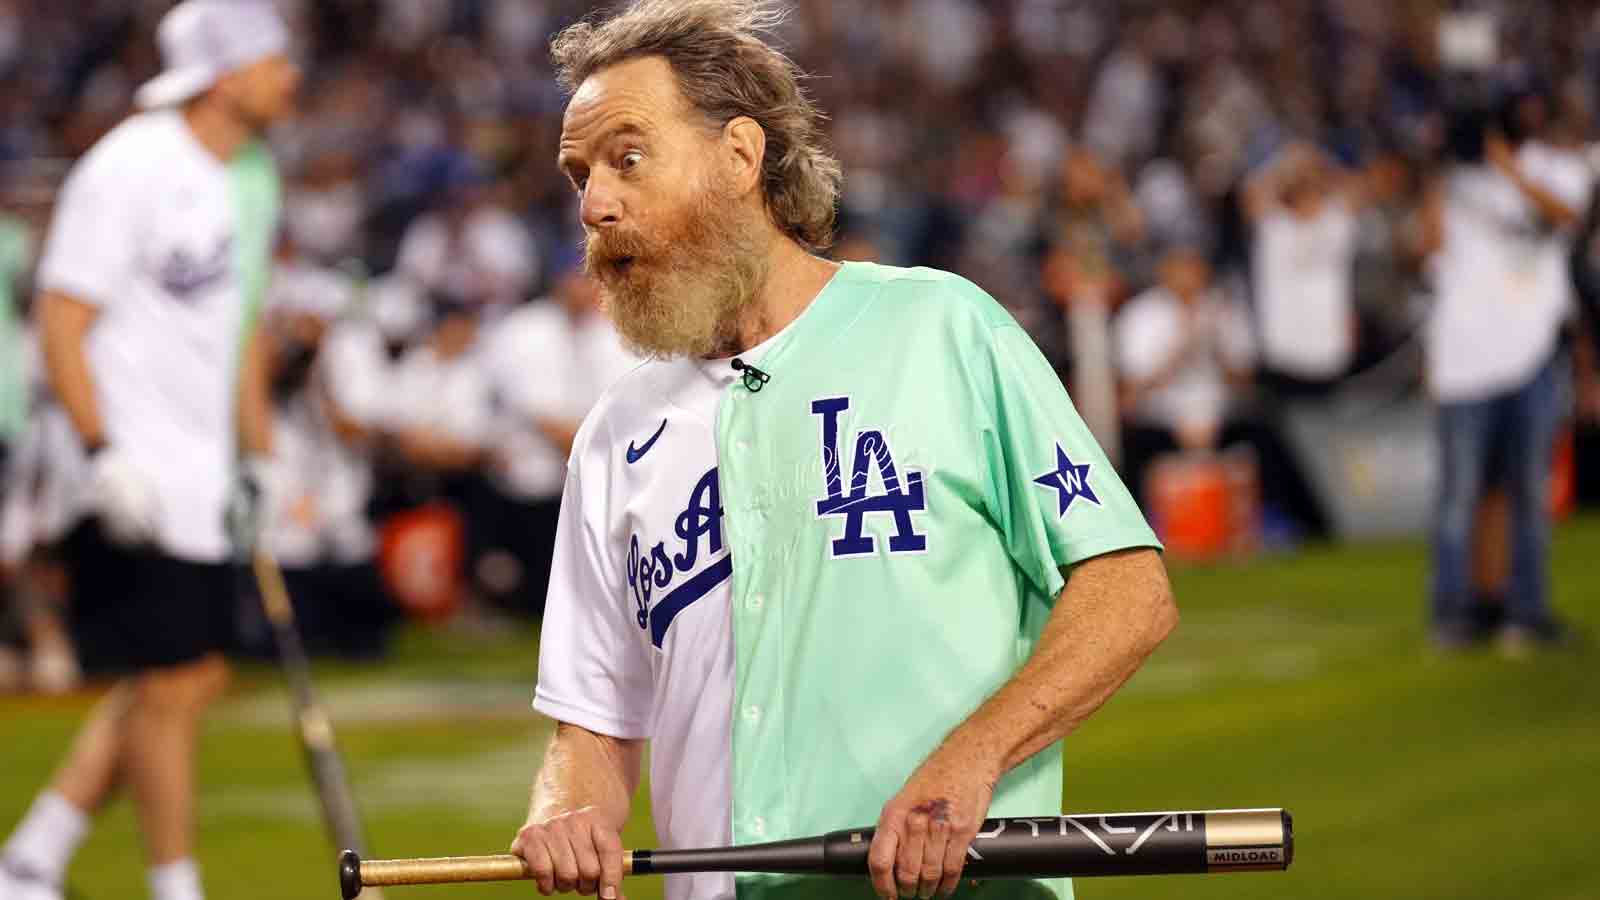 Bryan Cranston Hit By Liner, Gets Ejected at All-Star Celebrity Game – NBC  Los Angeles